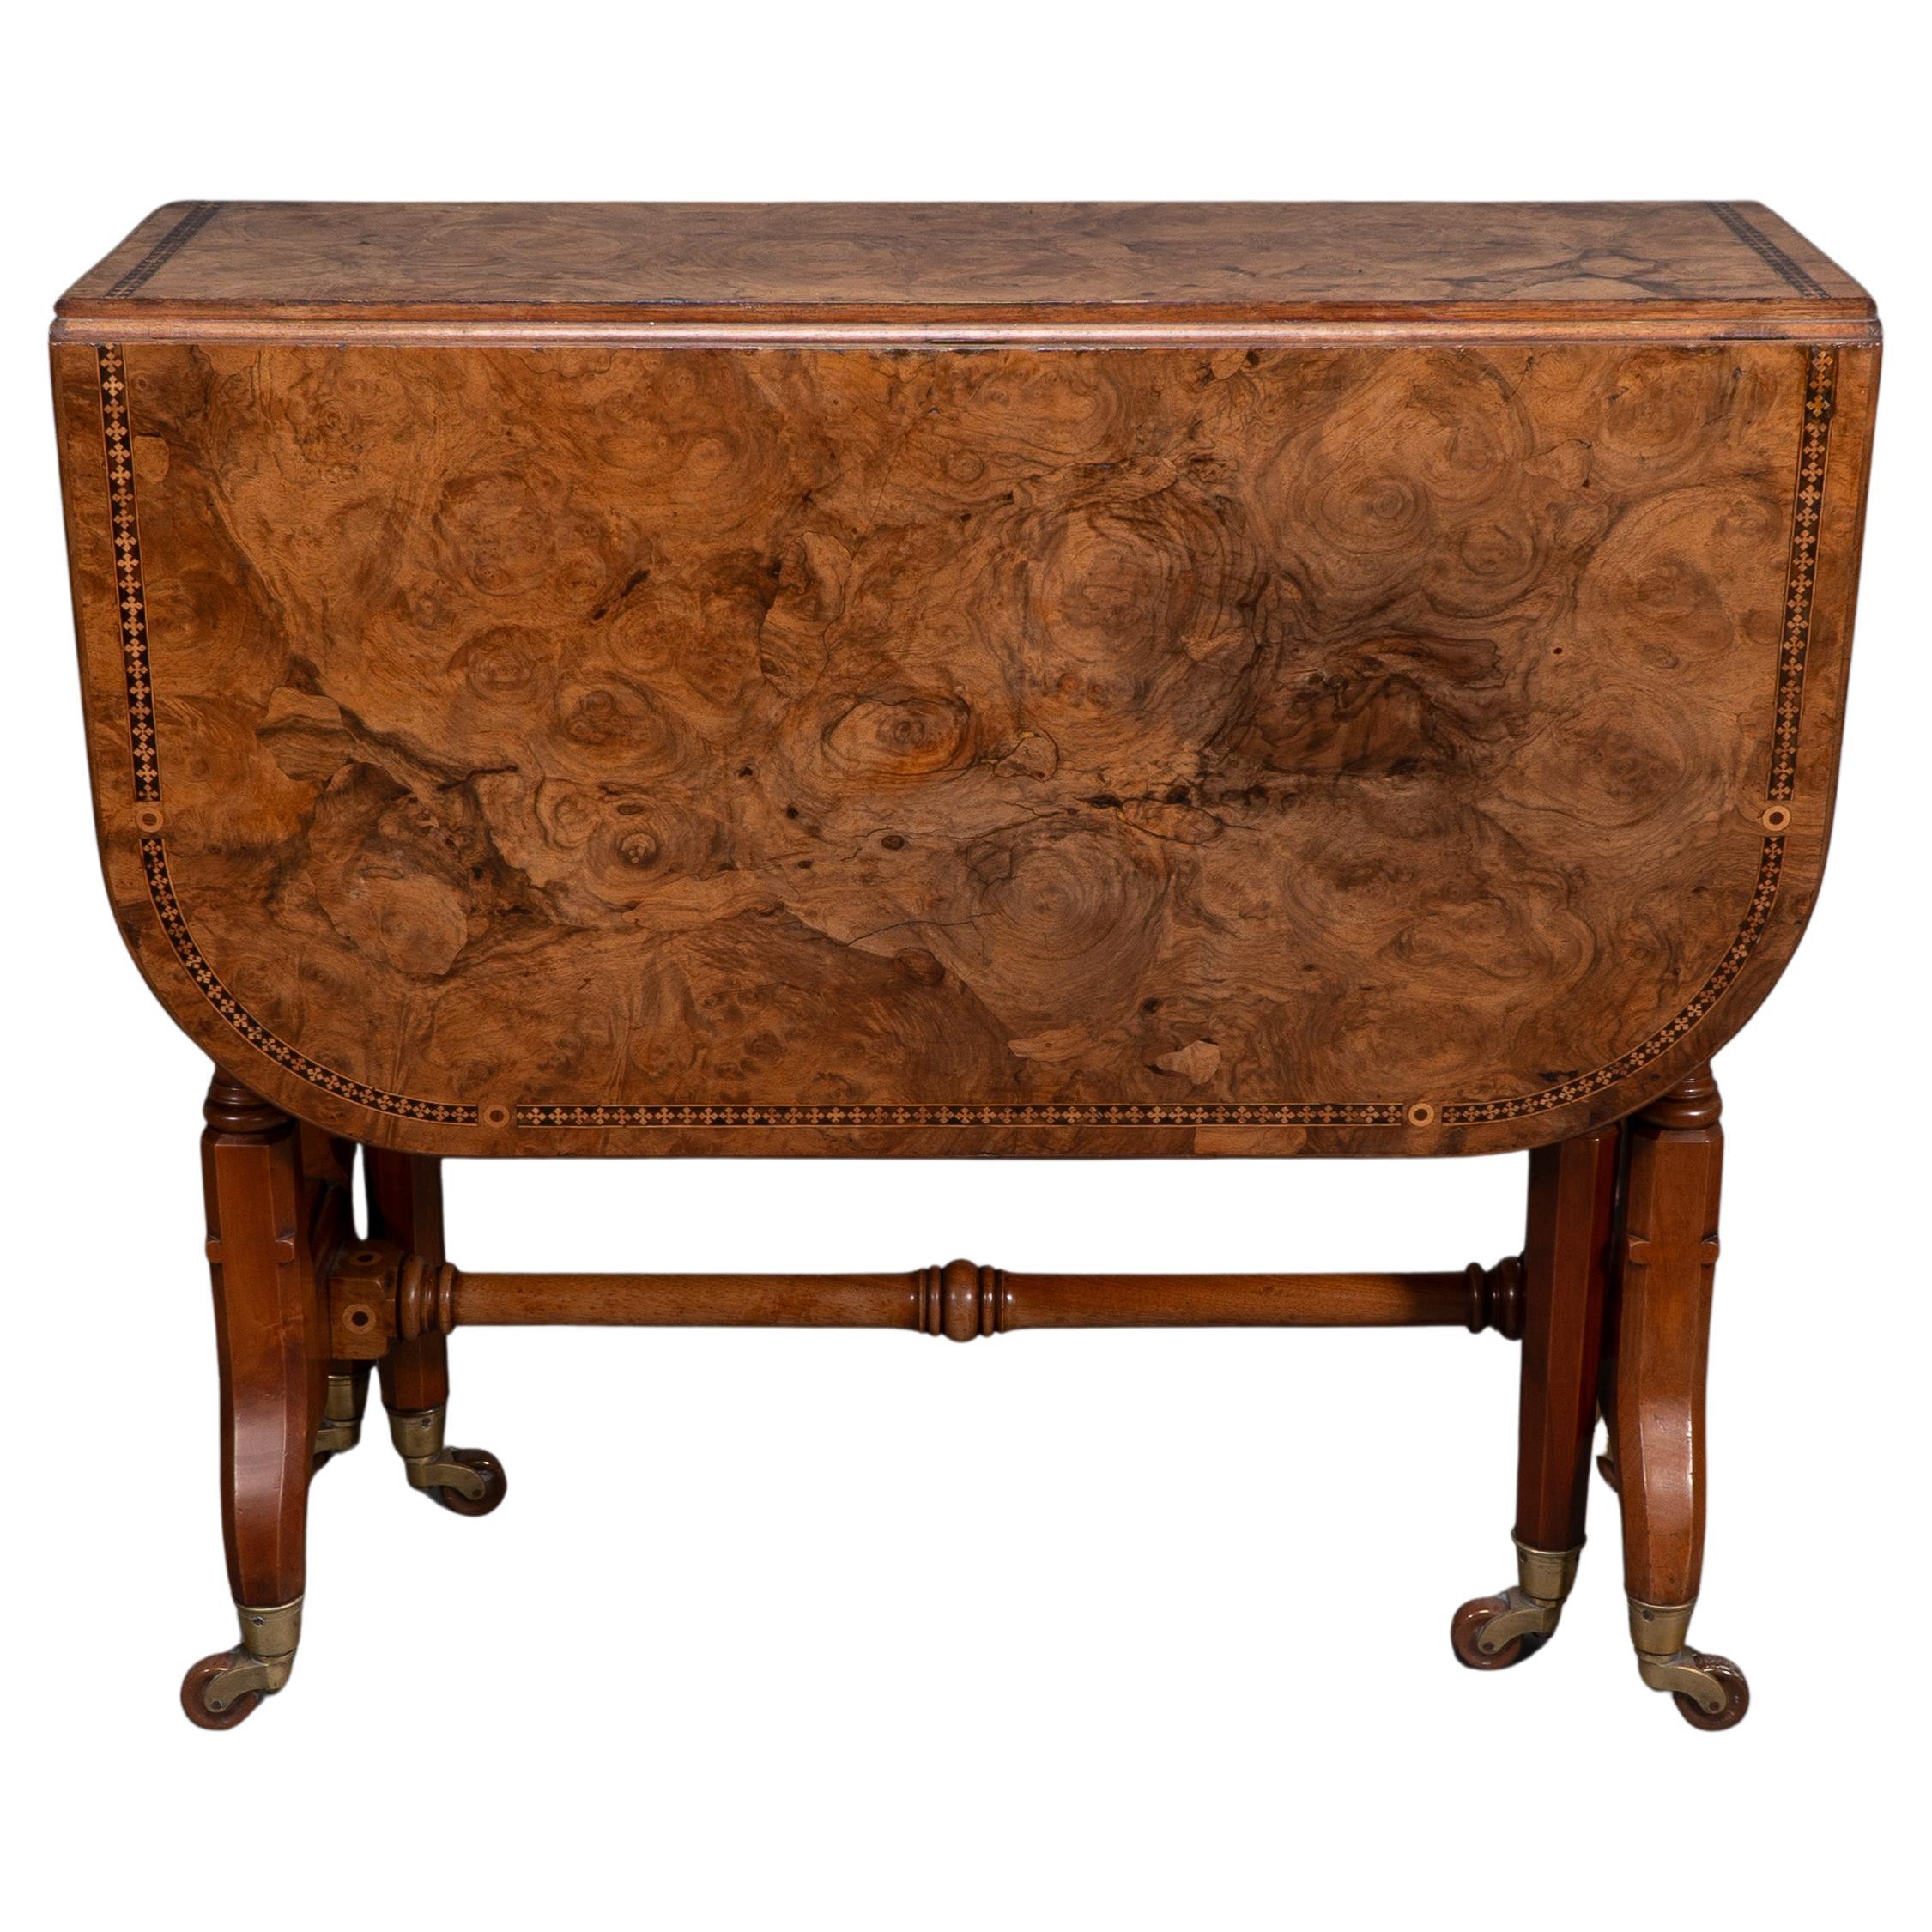 Charles Bevan for Marsh & Jones Late Kendal. An exhibition quality Gothic Revival Burr Walnut drop leaf Sutherland table with fine inlaid decoration to the top in exceptional original condition. Retaining the original Marsh & Jones paper